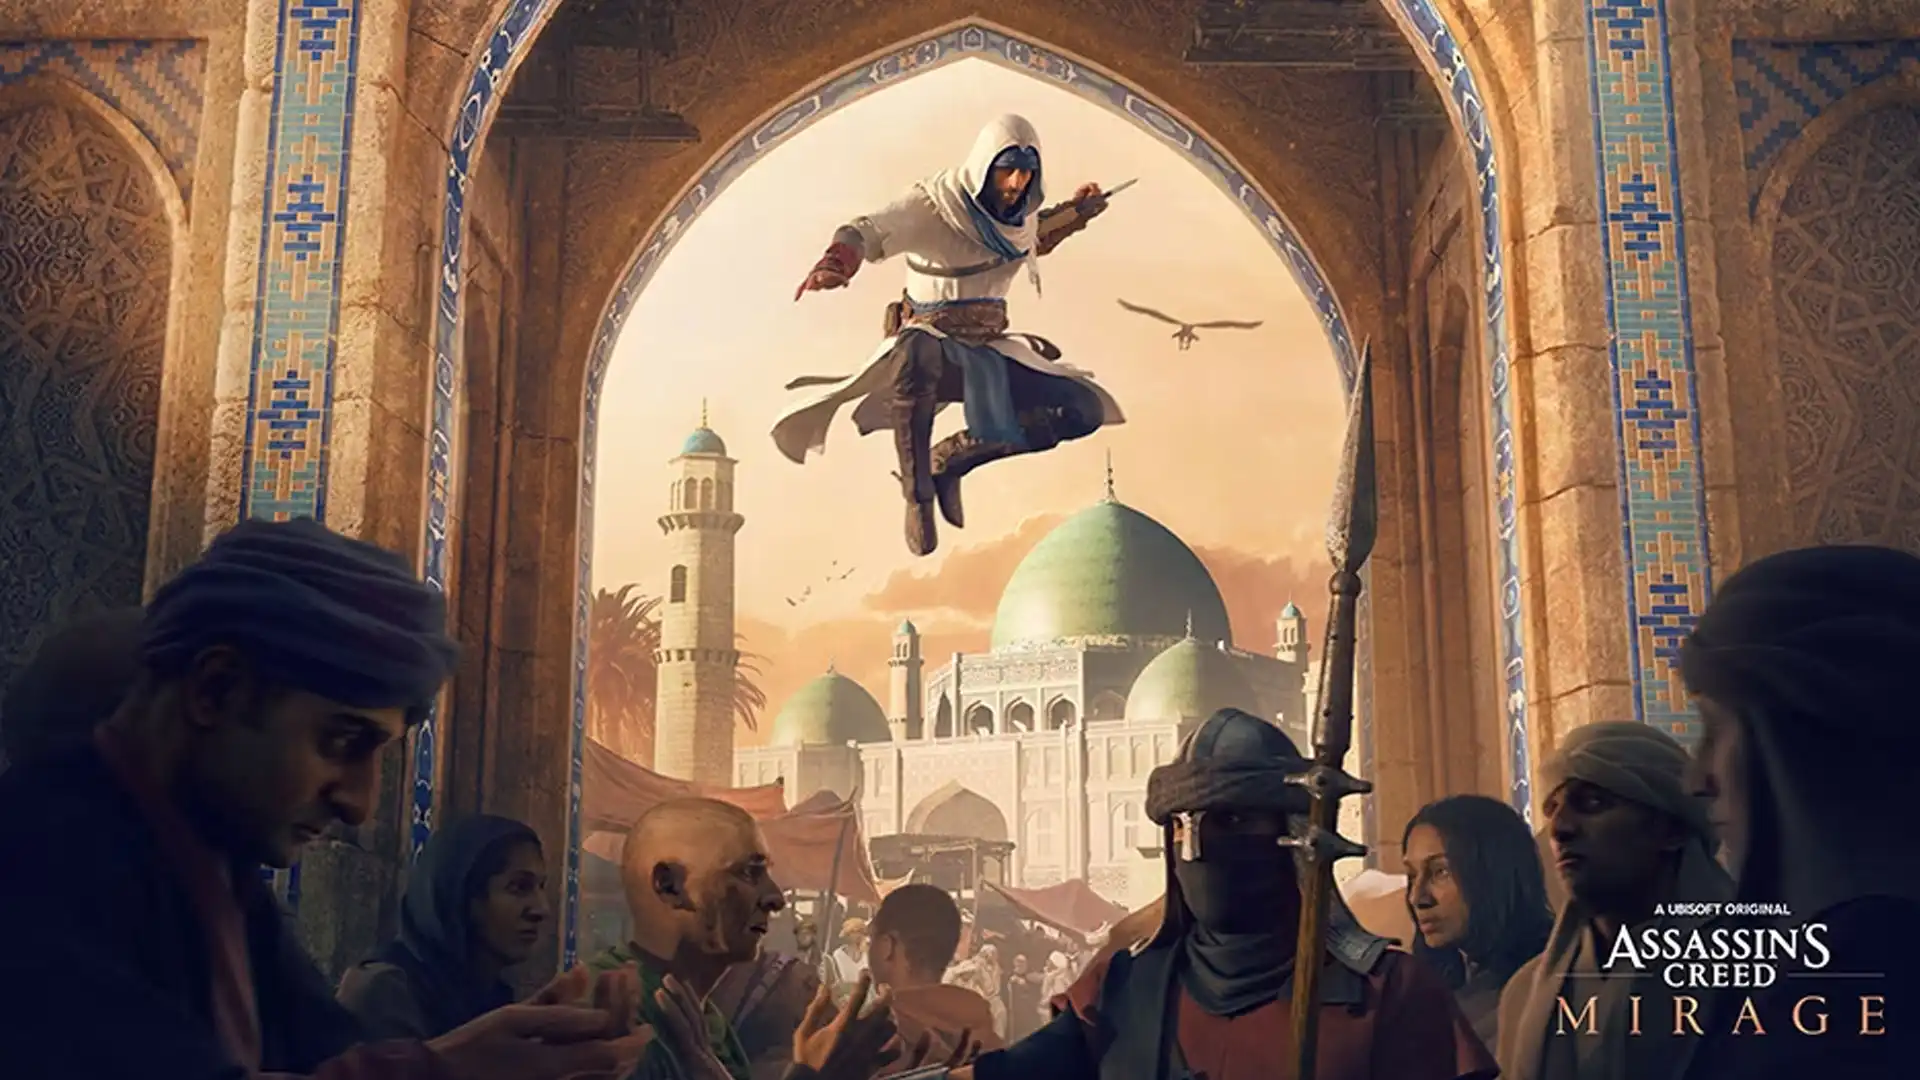 Assassin’s Creed Mirage’s New Podcast Series Explores 9th Century Baghdad – Available Now On All Podcast Platforms